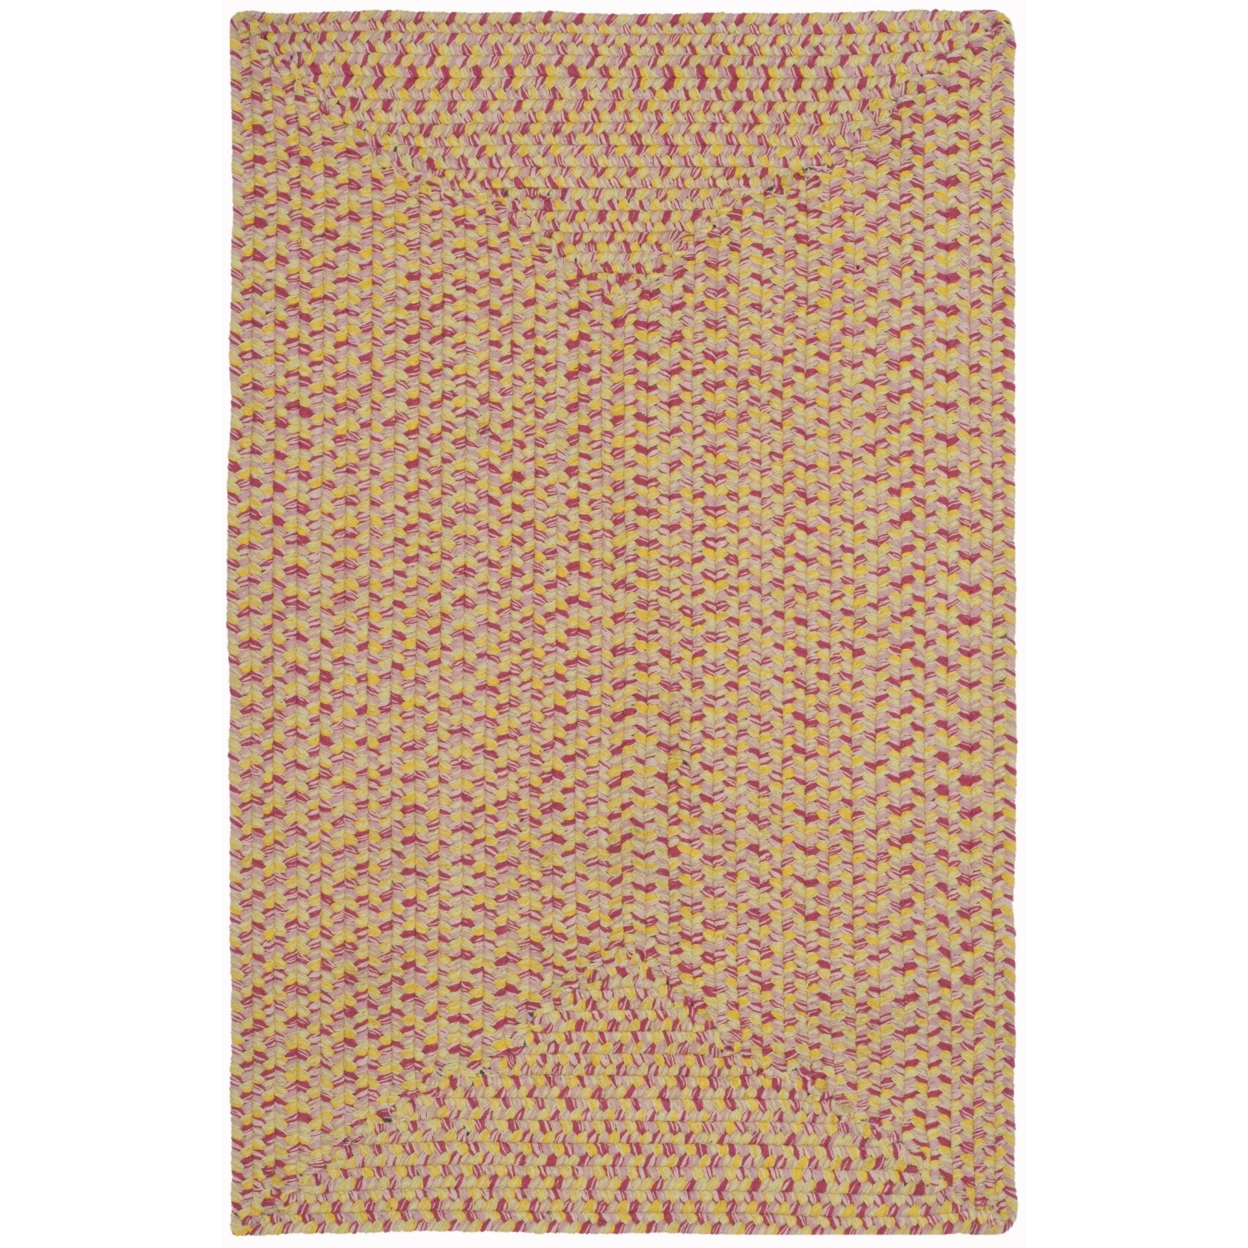 SAFAVIEH Braided Collection BRD164A Handwoven Multi Rug - 5' X 8'